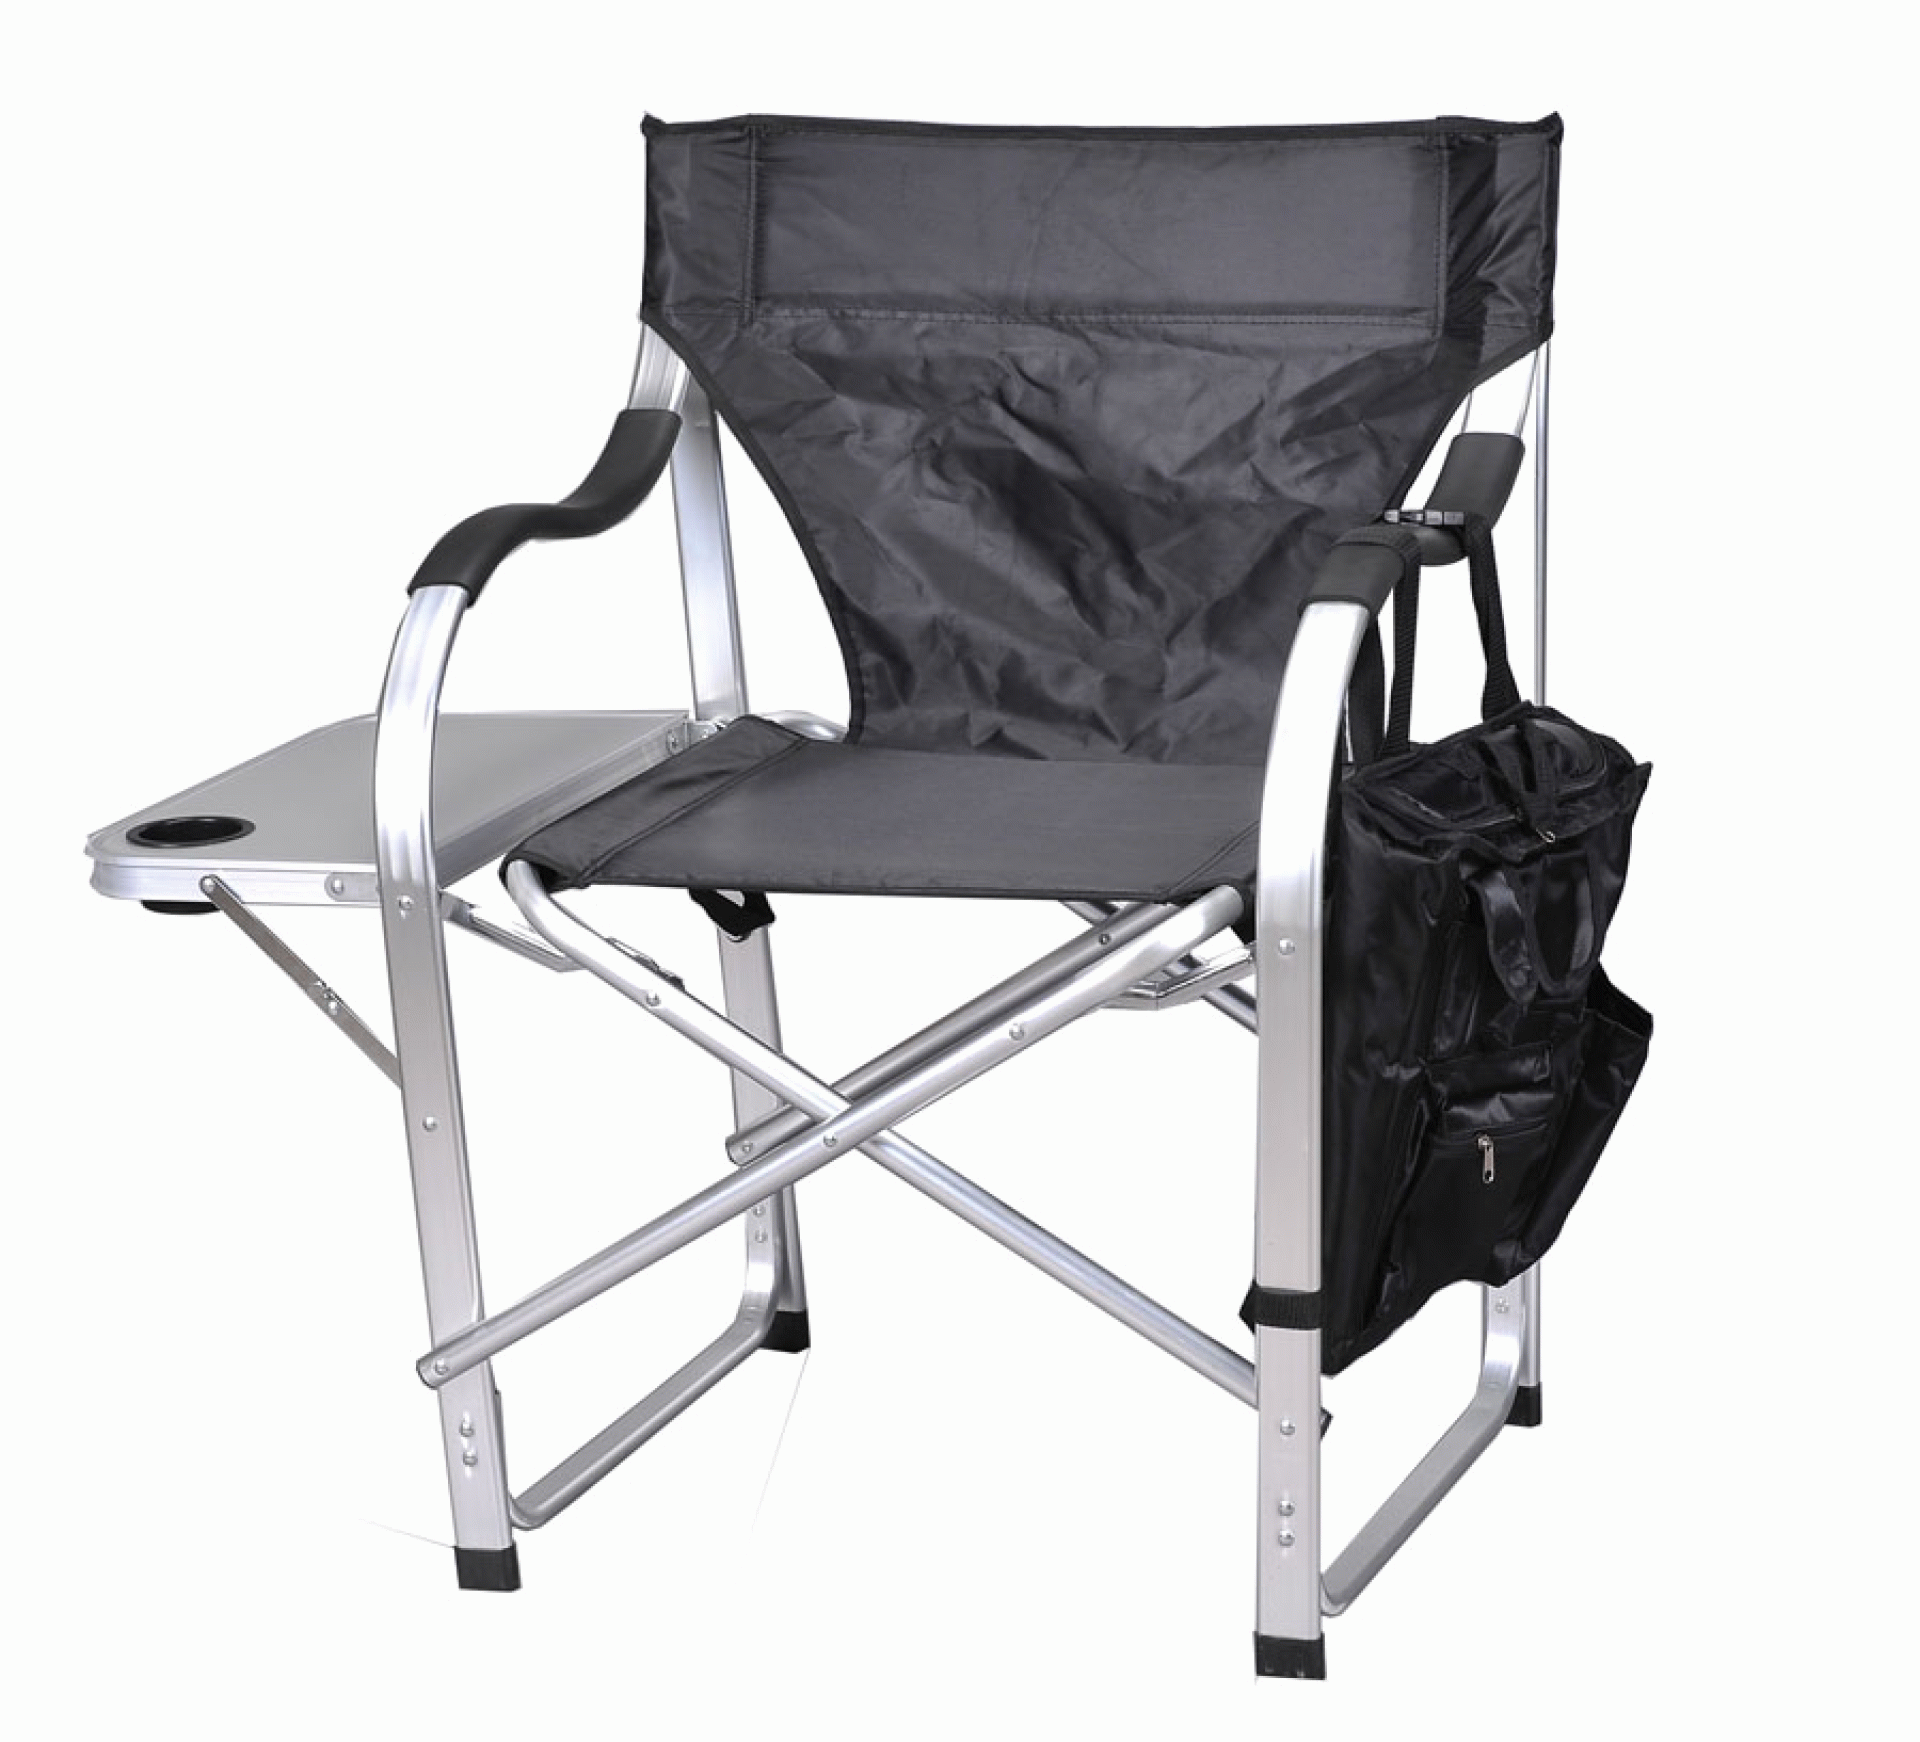 MINGS MARK INC. | SL-1206 BLACK | HEAVY DUTY DIRECTOR'S CHAIR W/ SIDE TABLE AND POCKETS - Black